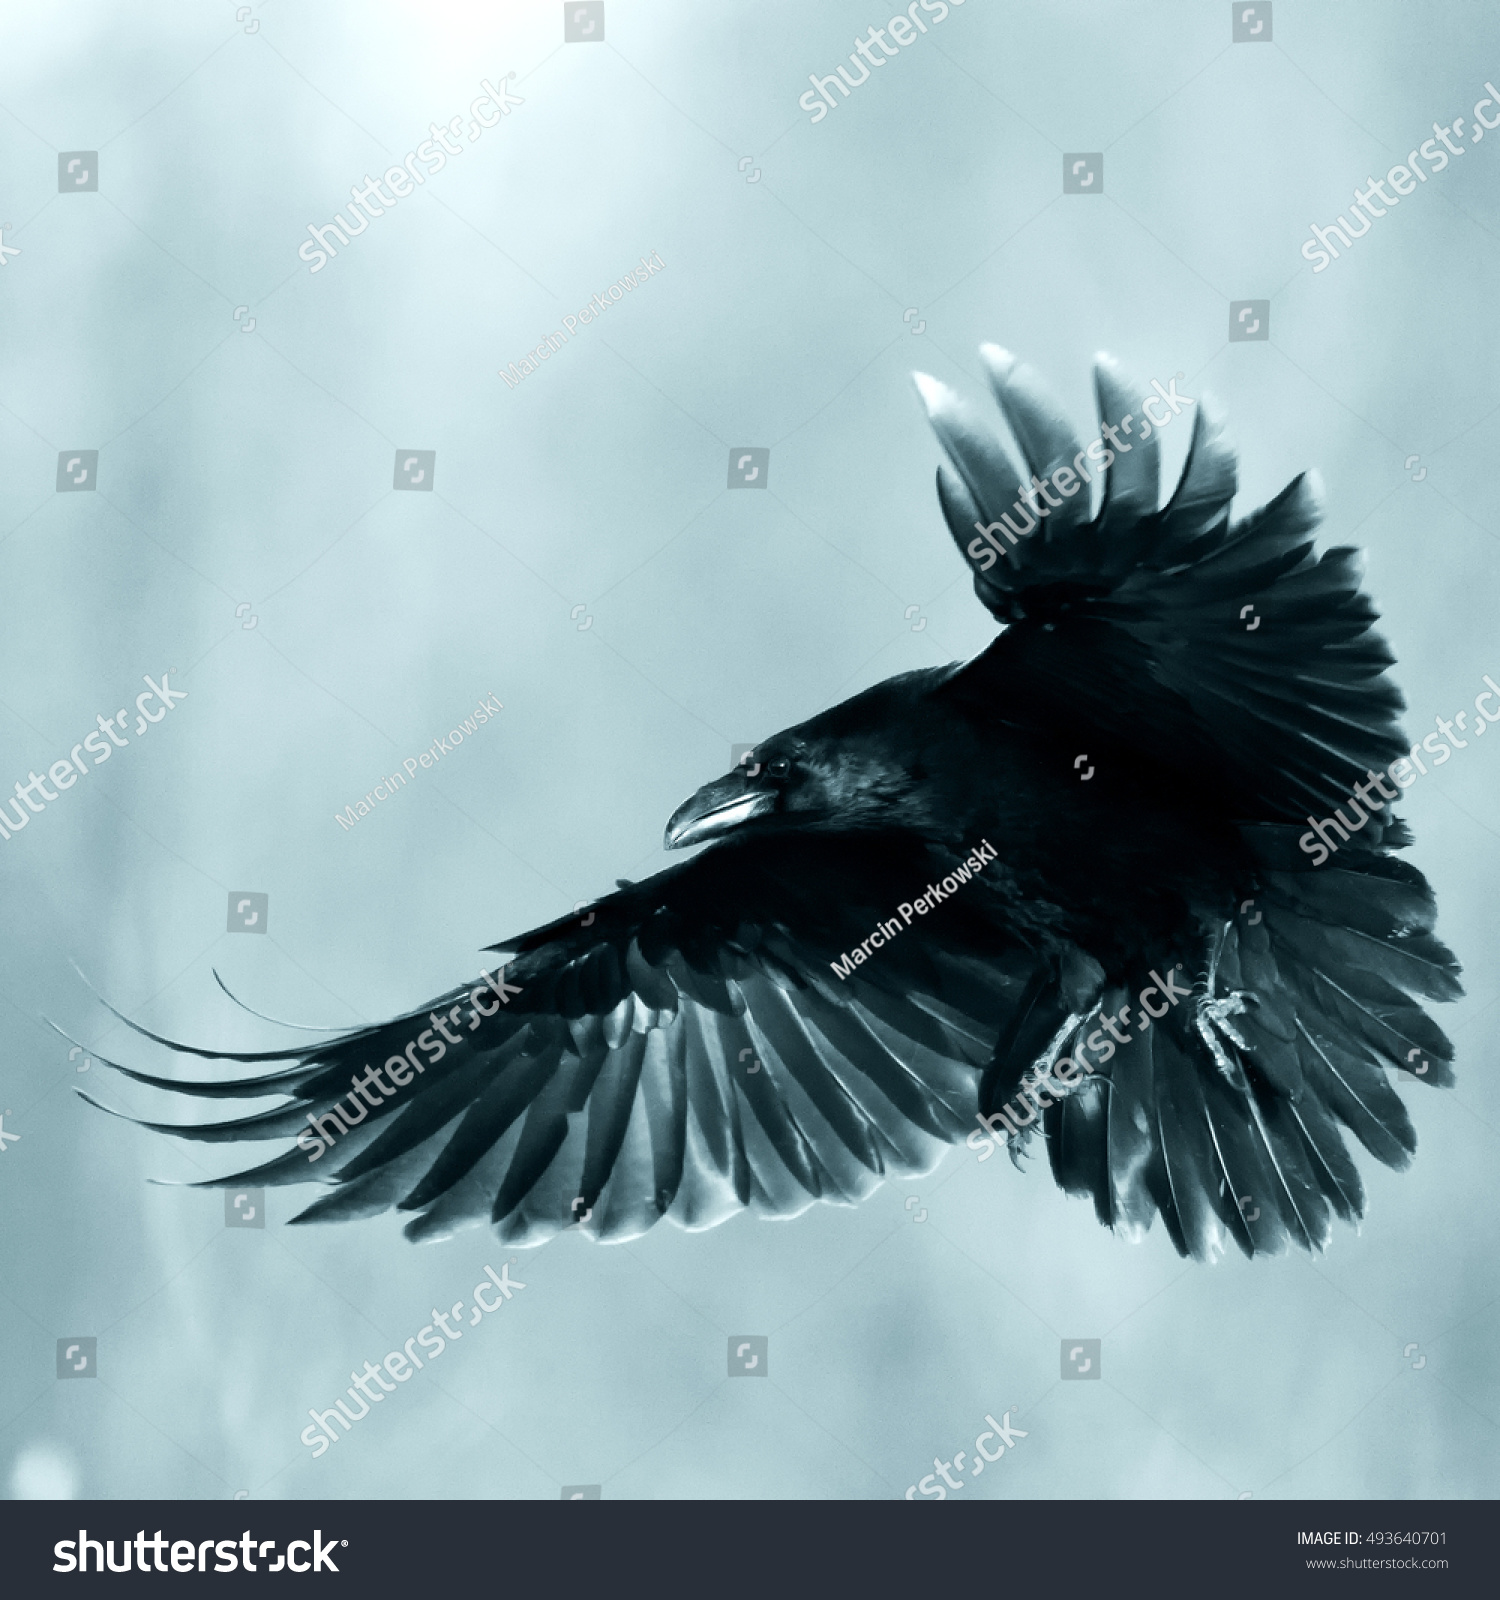 Details about   AM_ WO_ Halloween Black Feather Crow Scary Black Bird Raven Decoration Sinister 